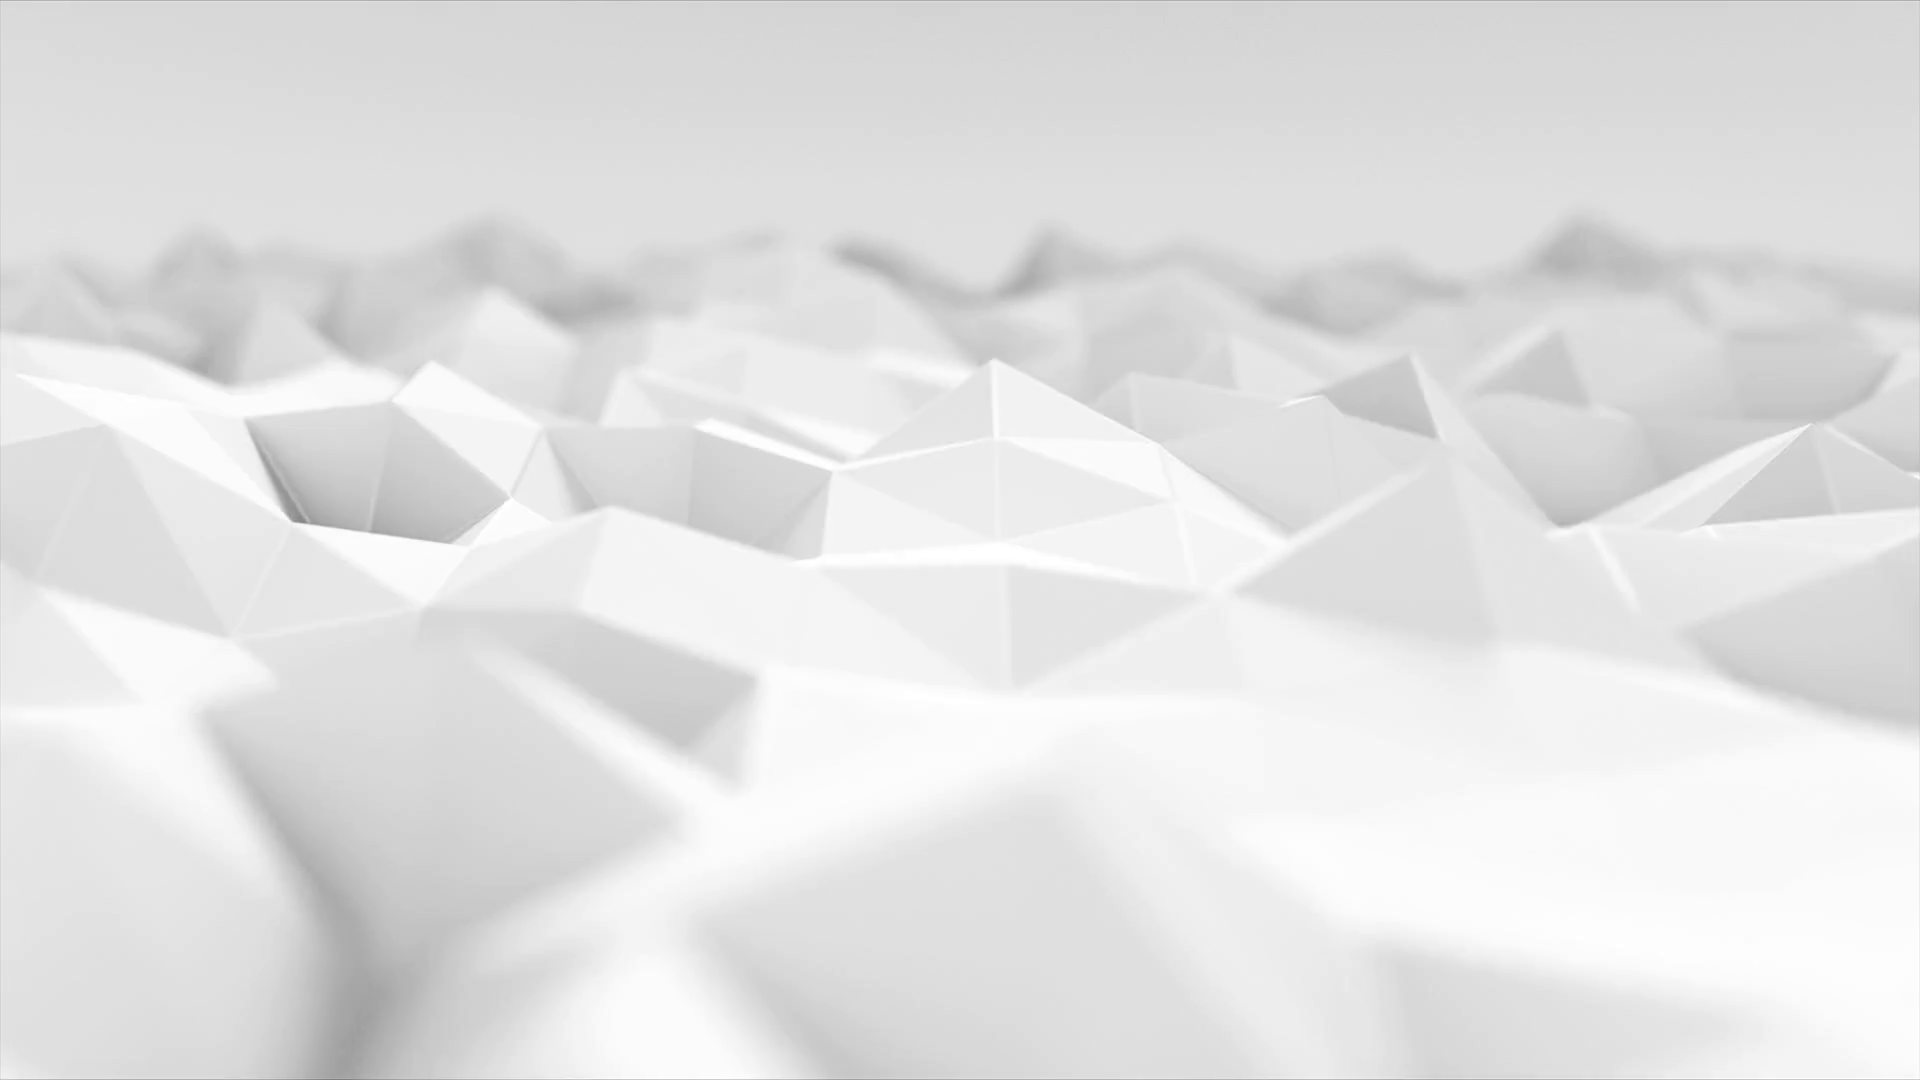 Stunning White Polygon Wallpaper Images For Free Download - Monochrome - HD Wallpaper 